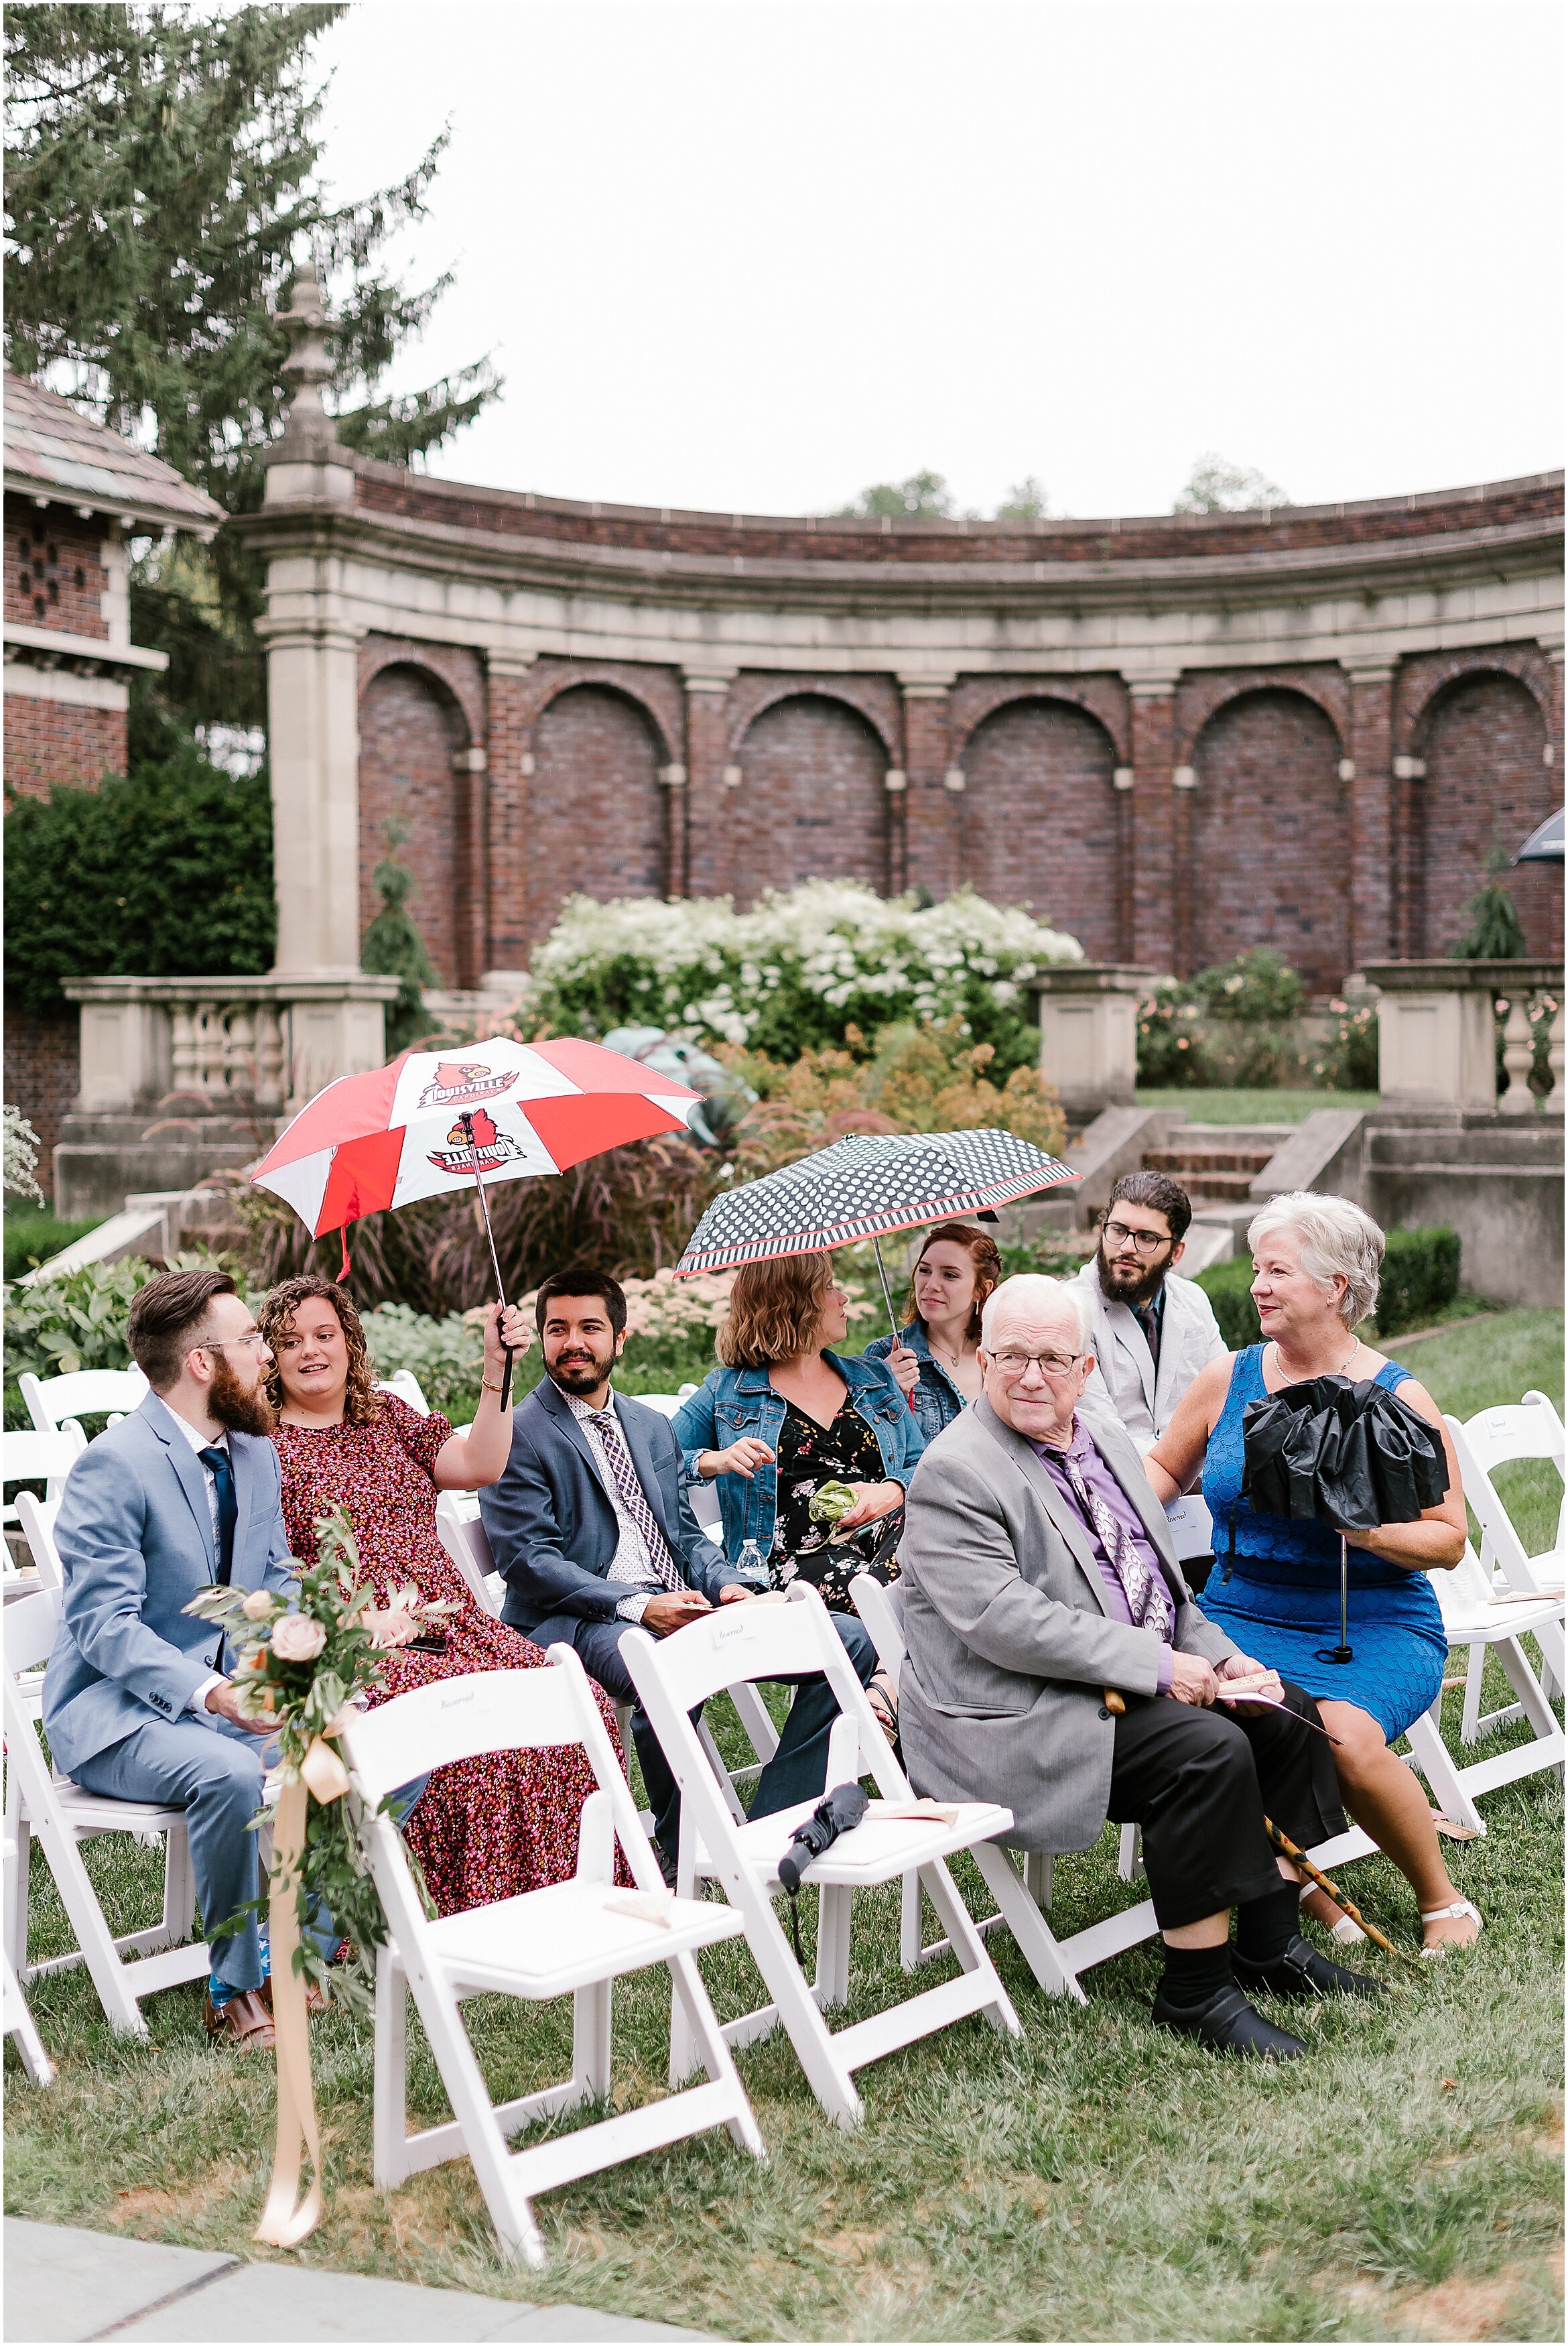 Rebecca Shehorn Photography Colleen and Kyle Inn at Irwin Gardens Wedding-447_The Commons Columbus Inn at Irwin Garden Indianapolis Wedding Photographer.jpg